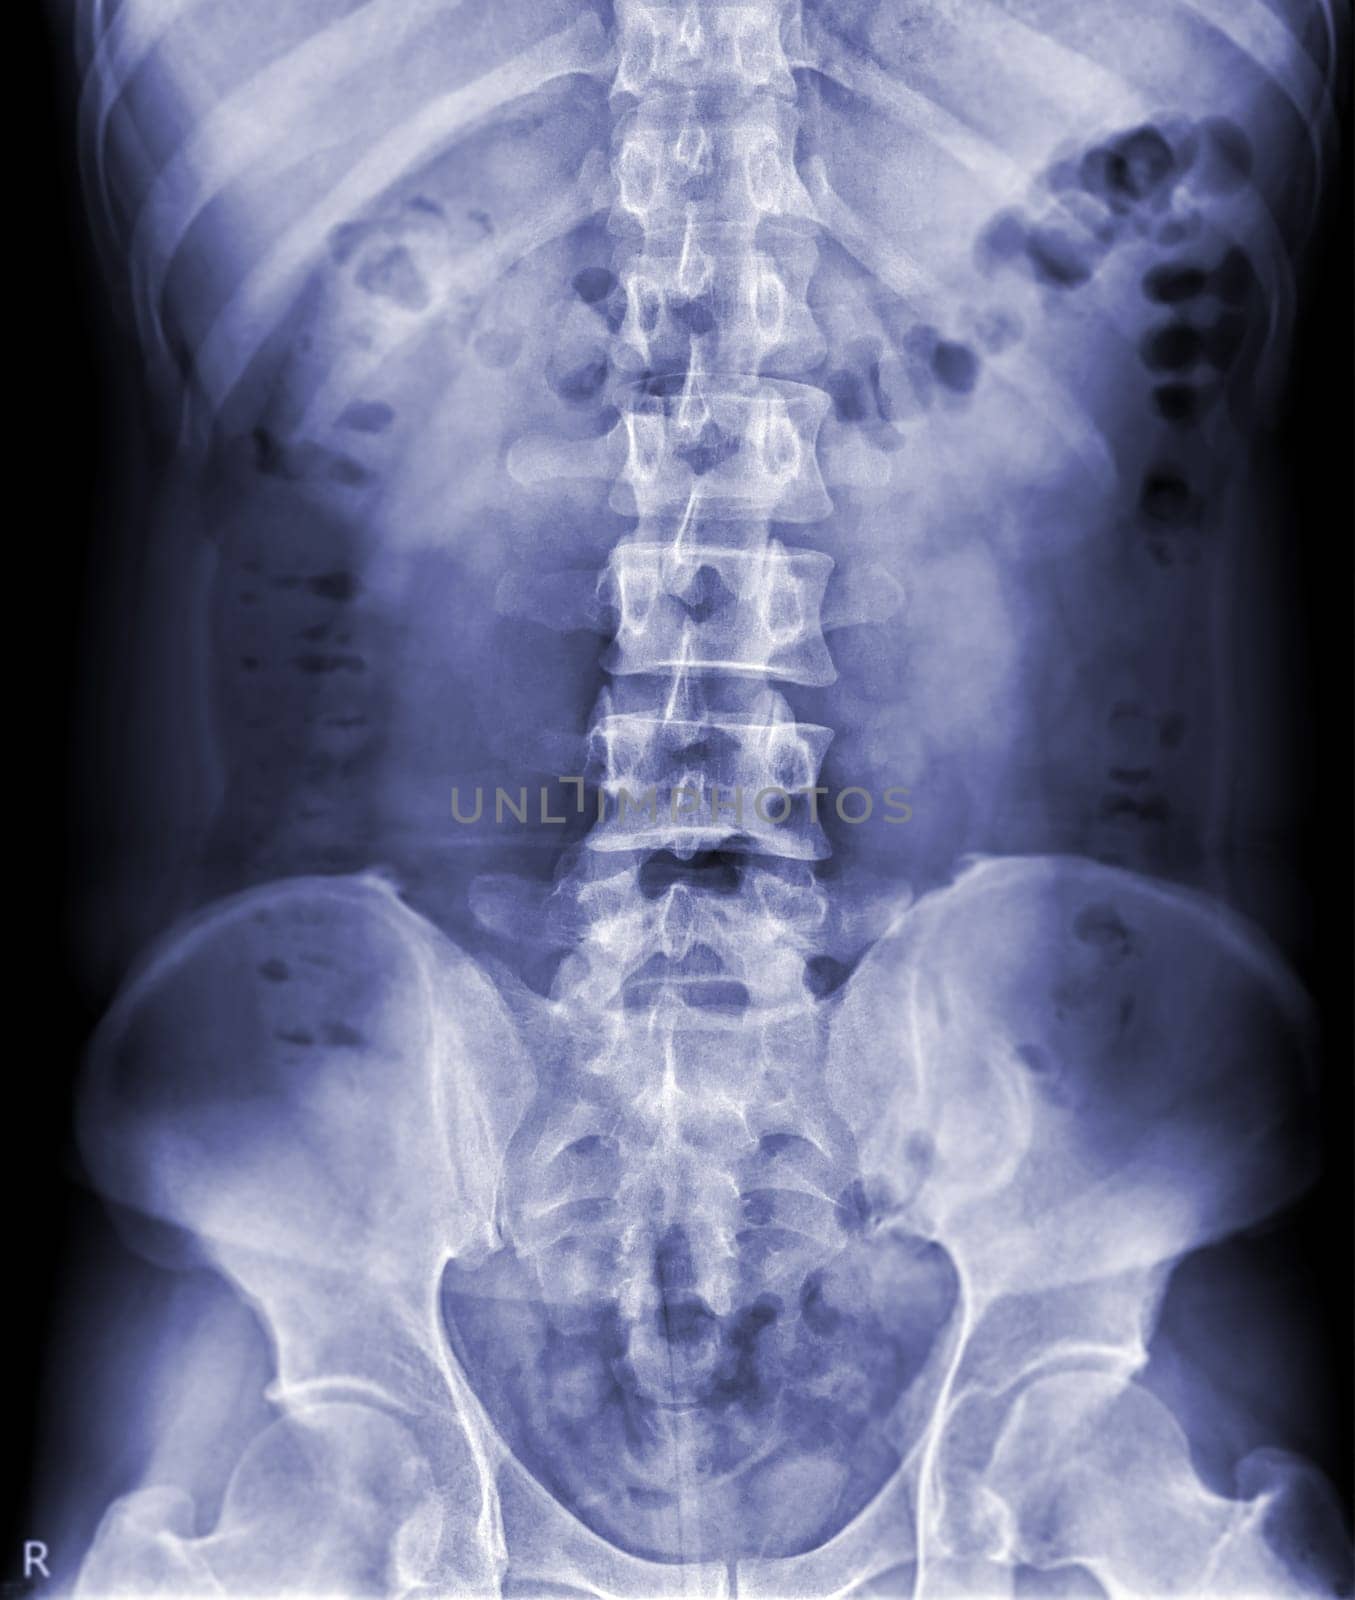 X-ray image of lambosacral spine or L-S spine by samunella